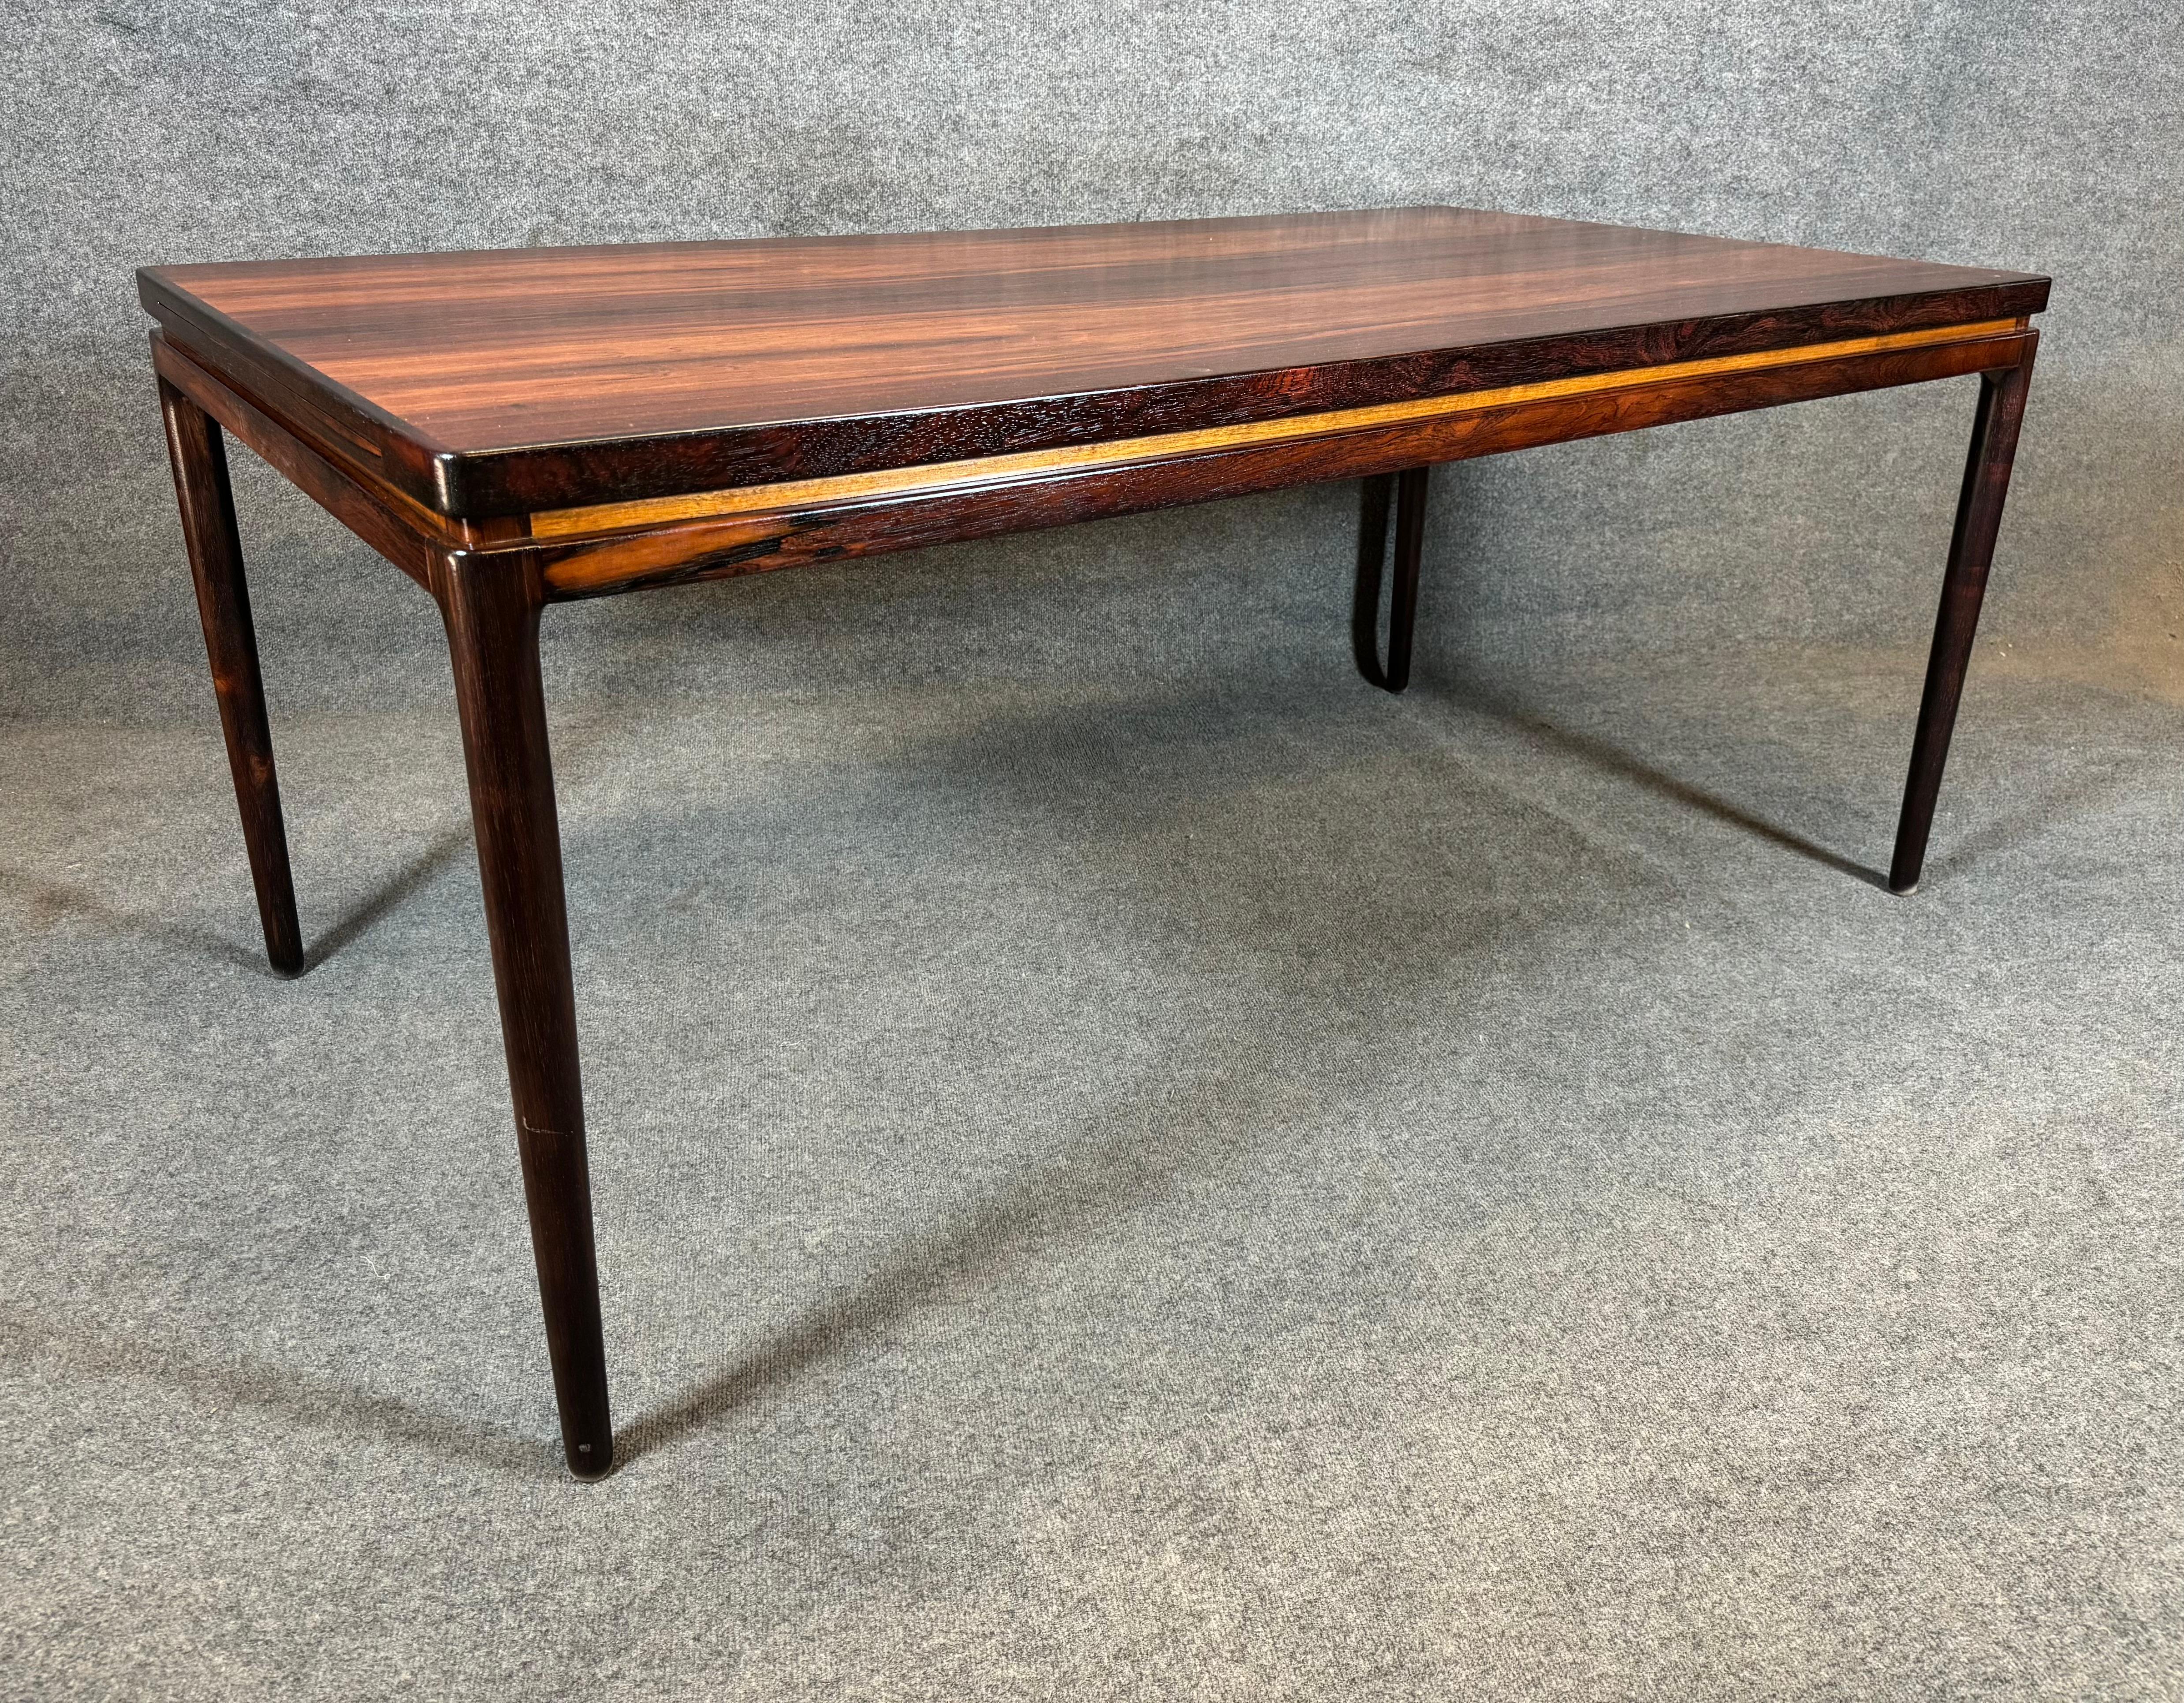 Vintage Danish Mid Century Modern Rosewood Dining Table by Johannes Andersen For Sale 5